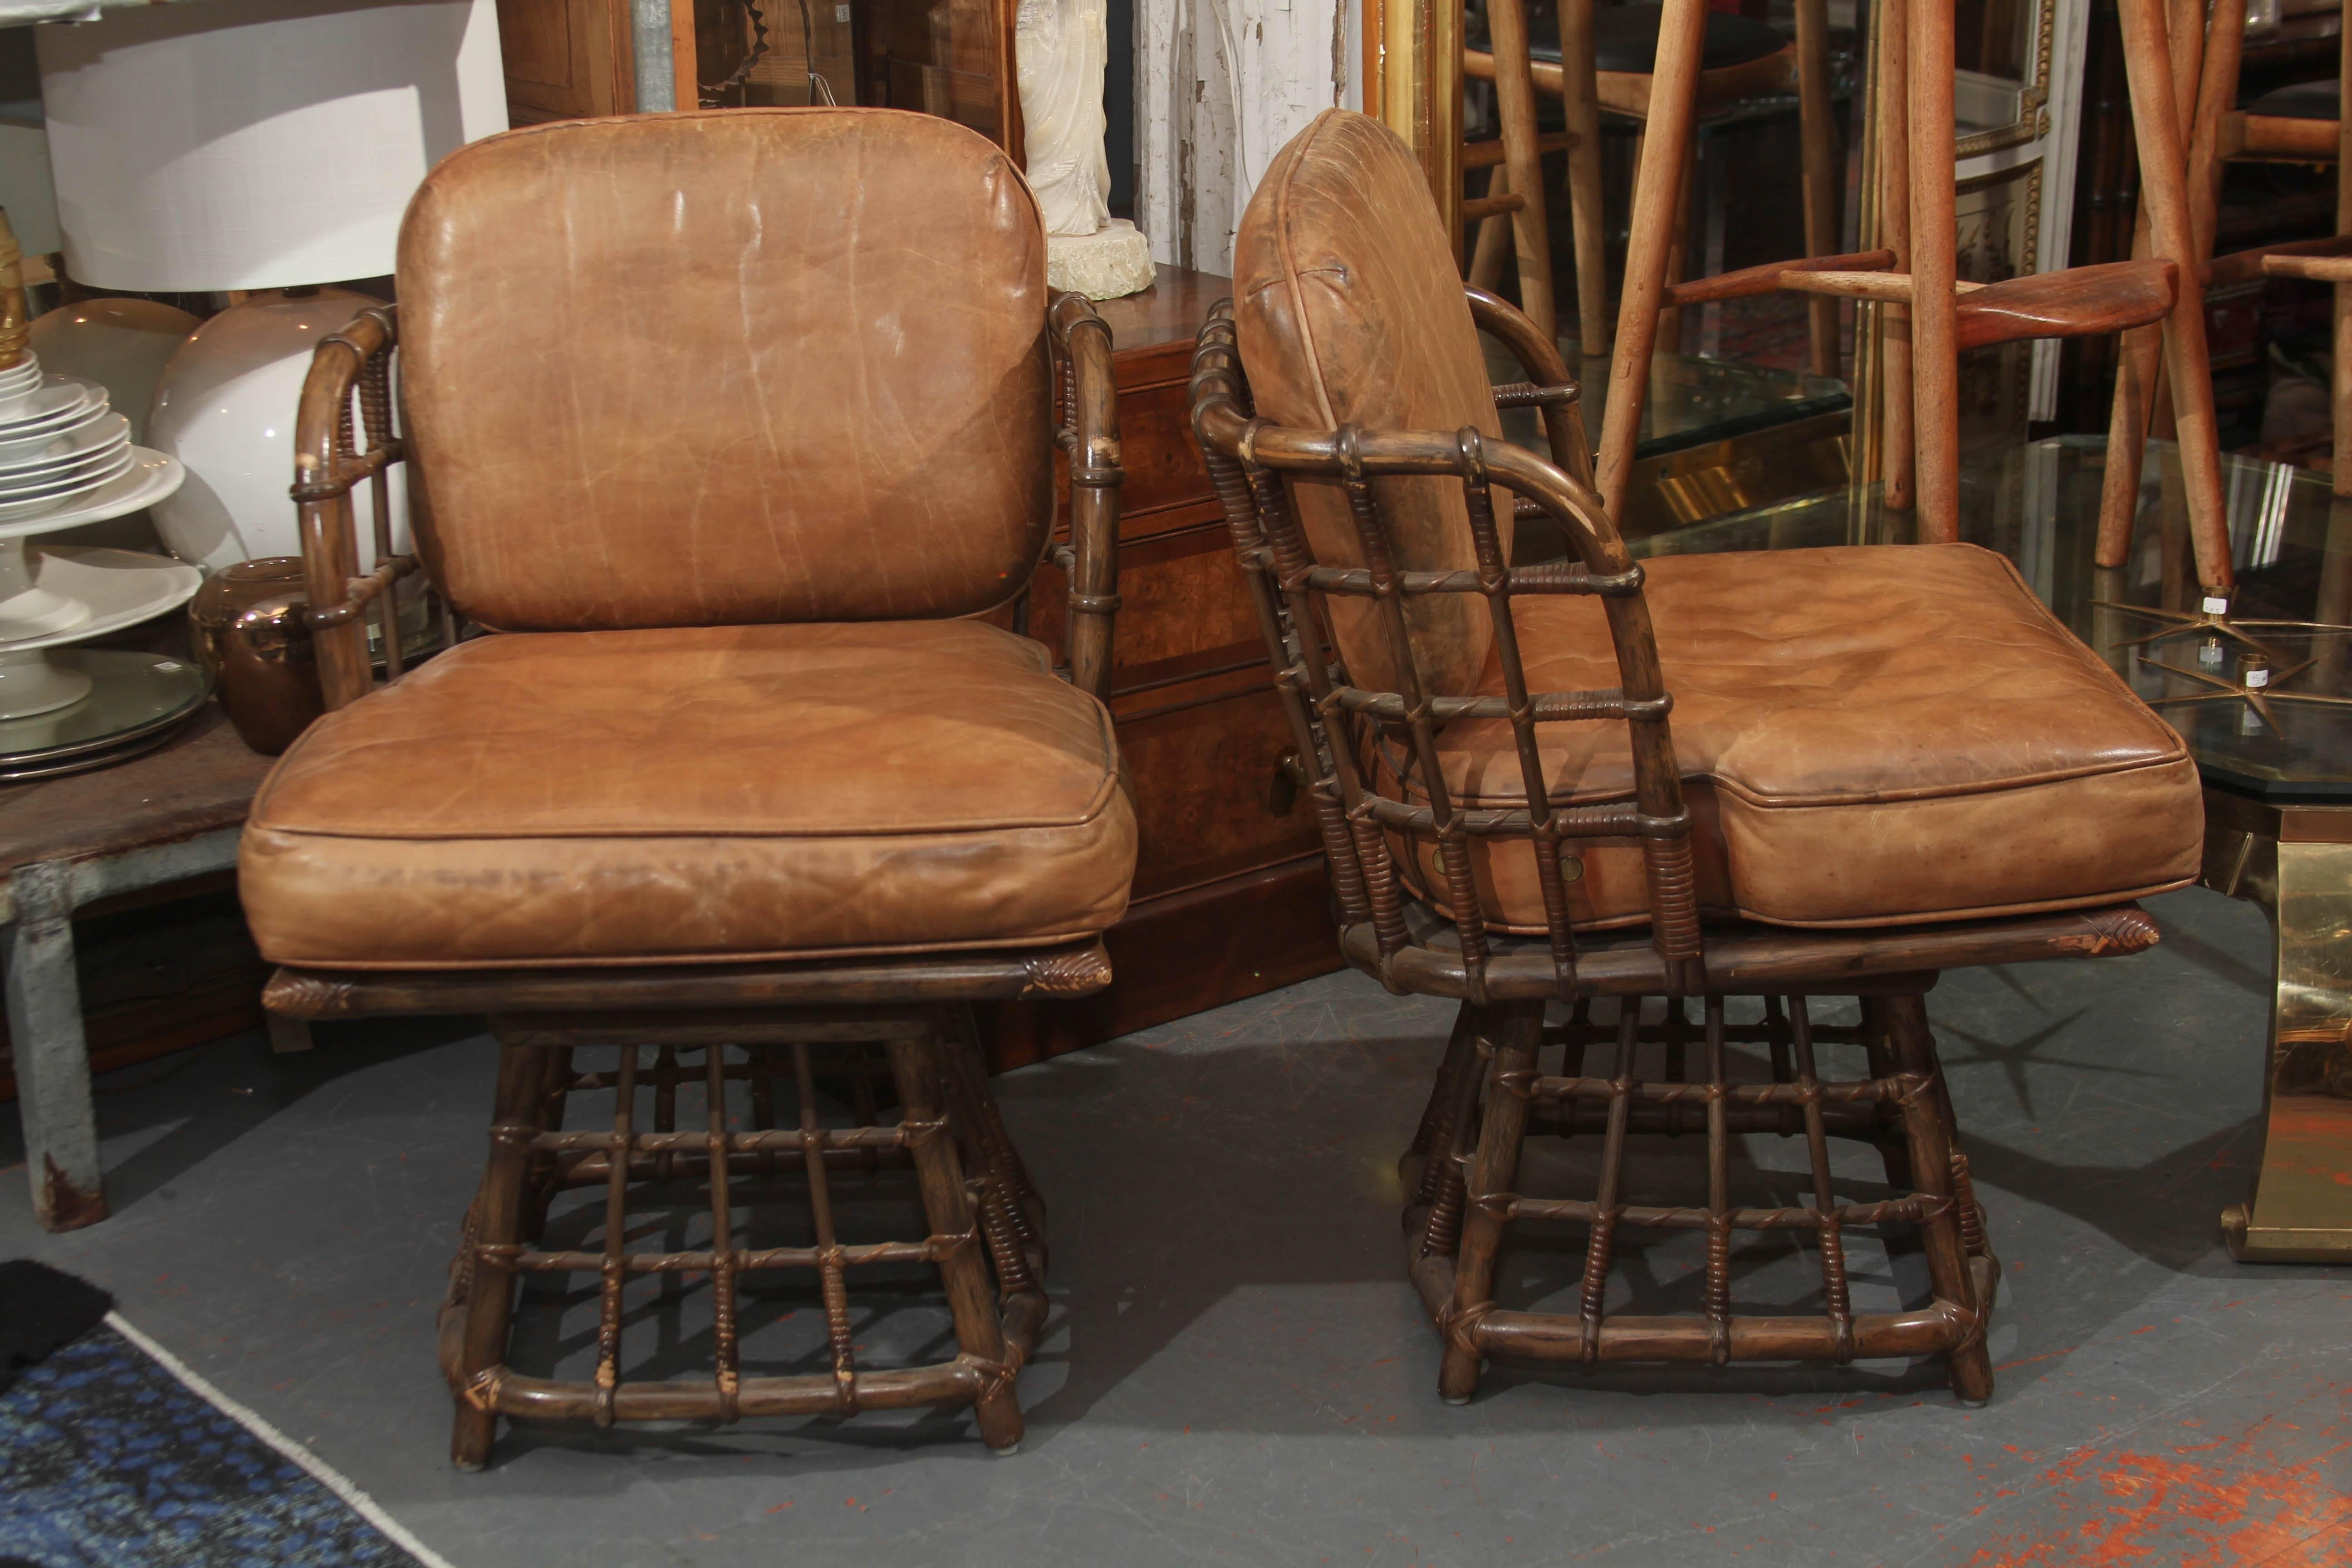 Pair of Mid-Century leather swivel side chairs by Maguire. Leather seat and back, great original condition.